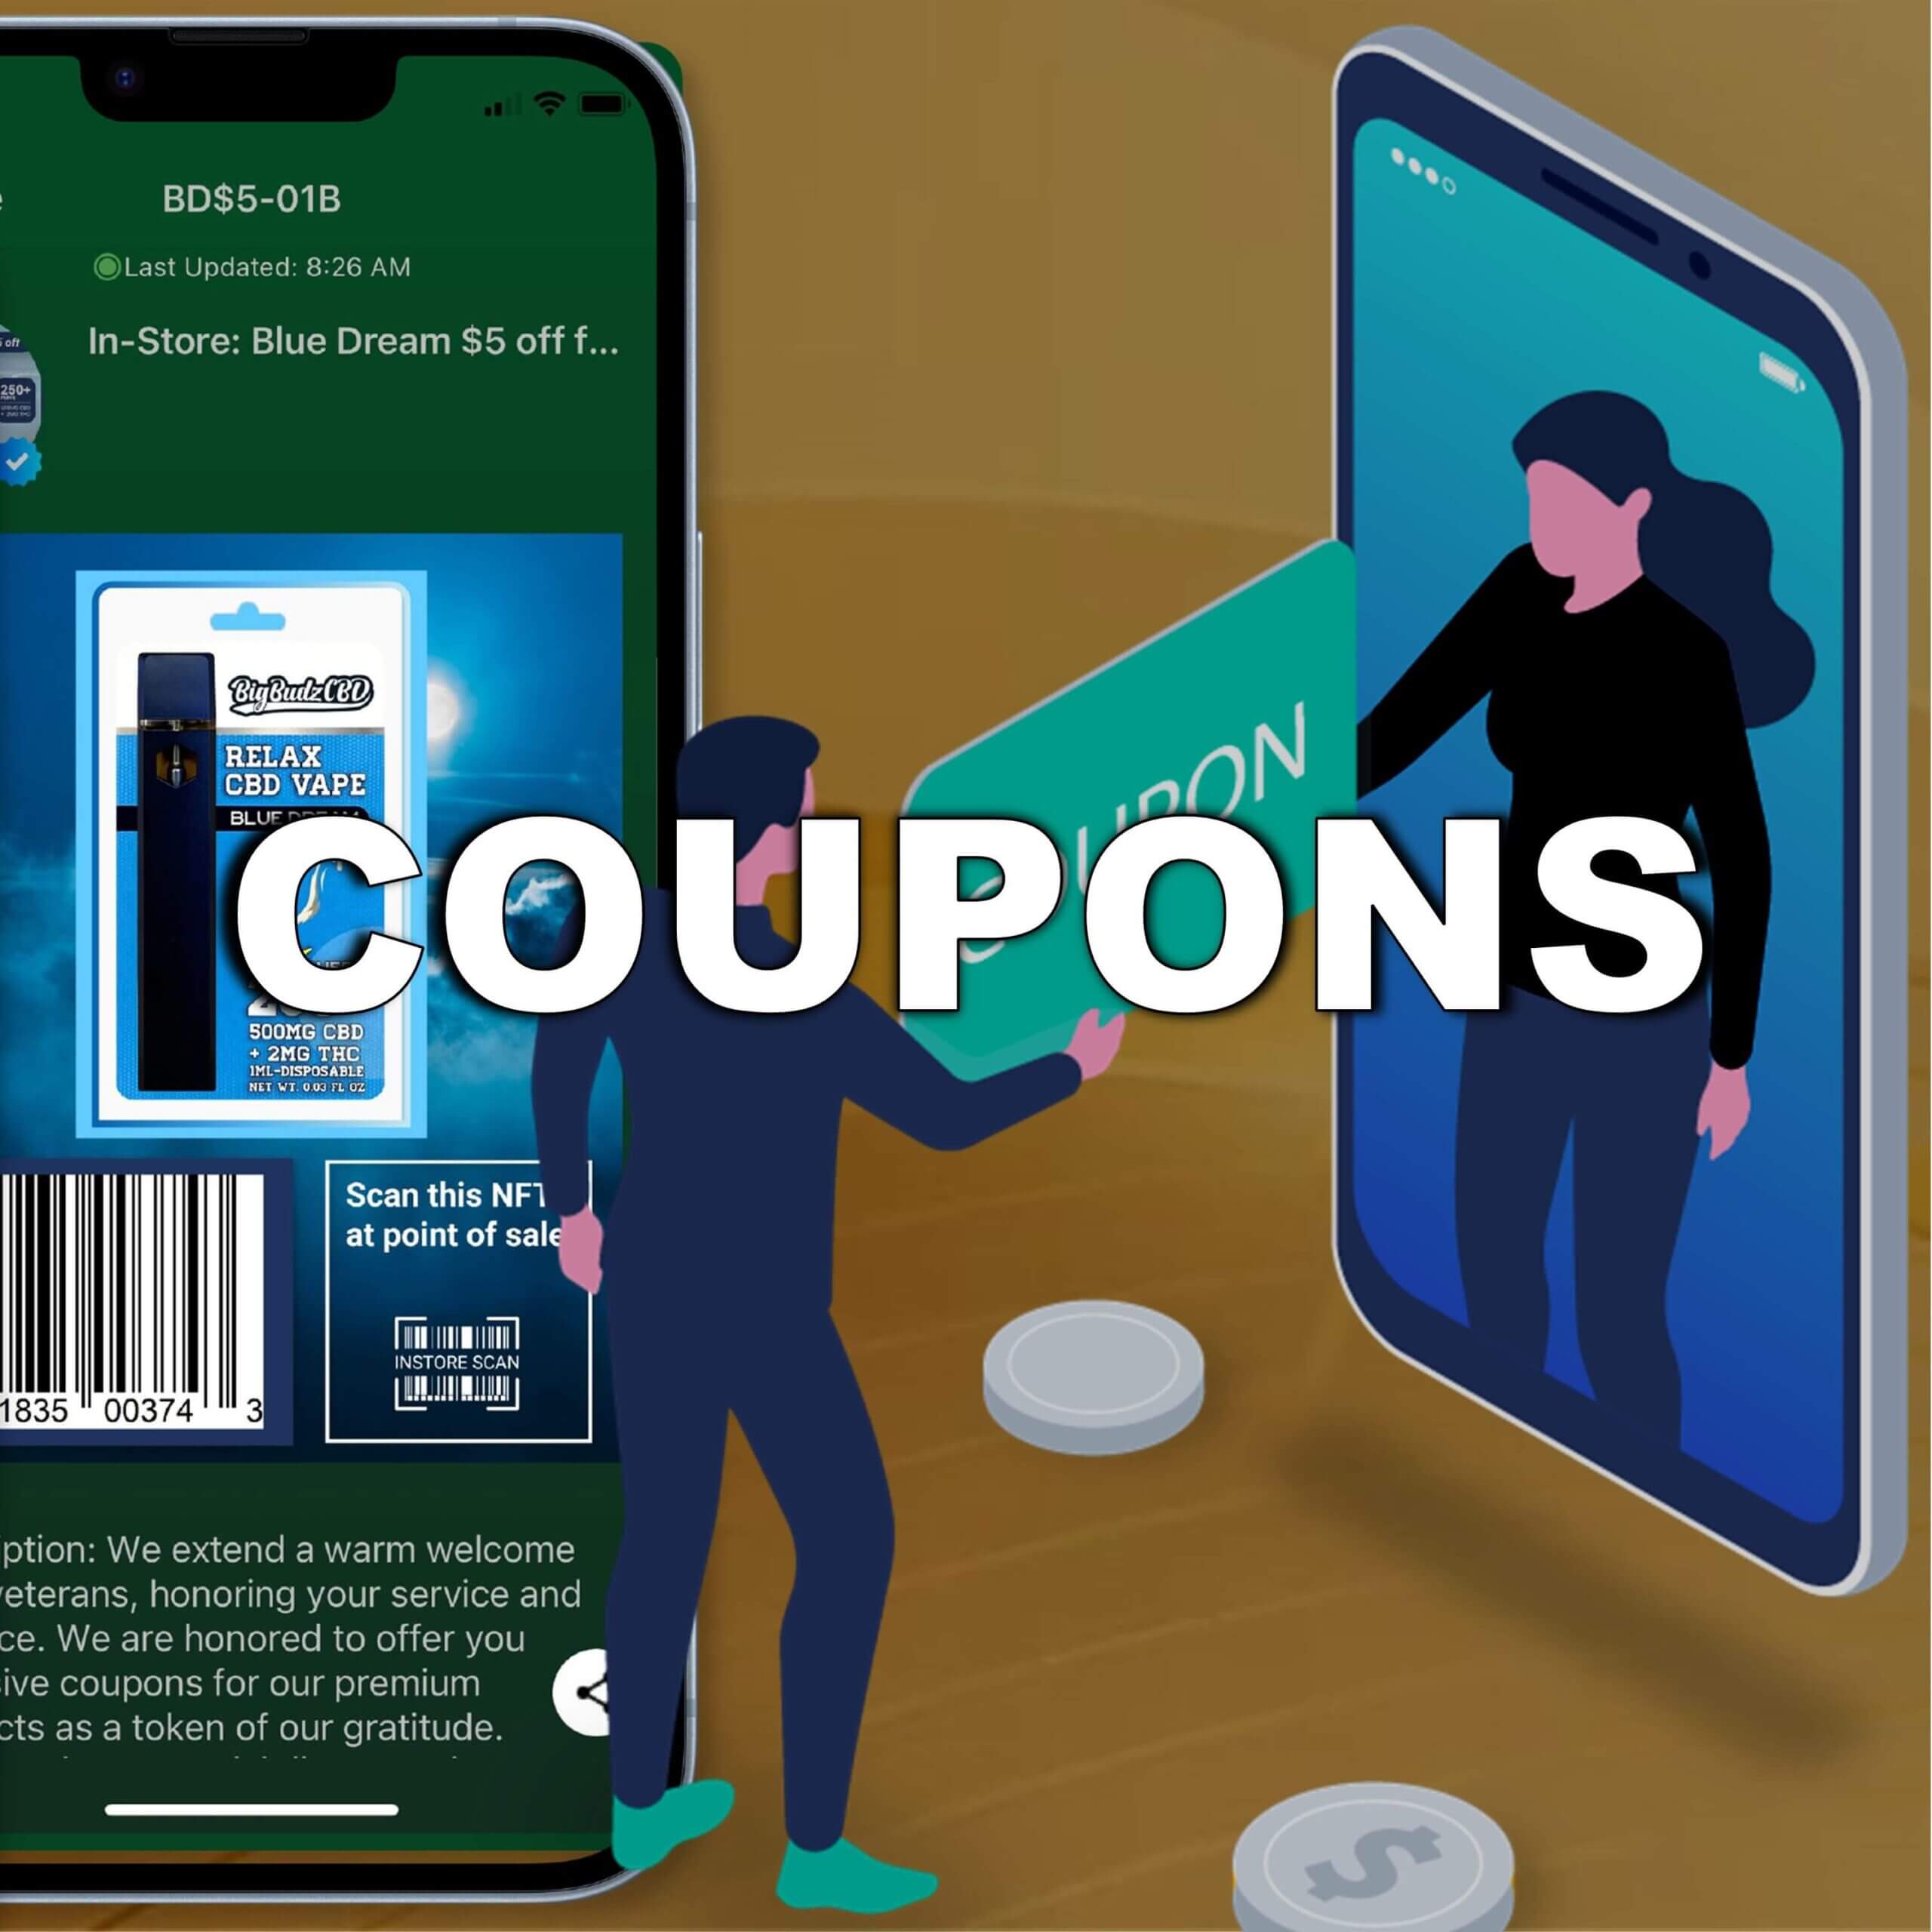 product categories thumbnail, COUPONS